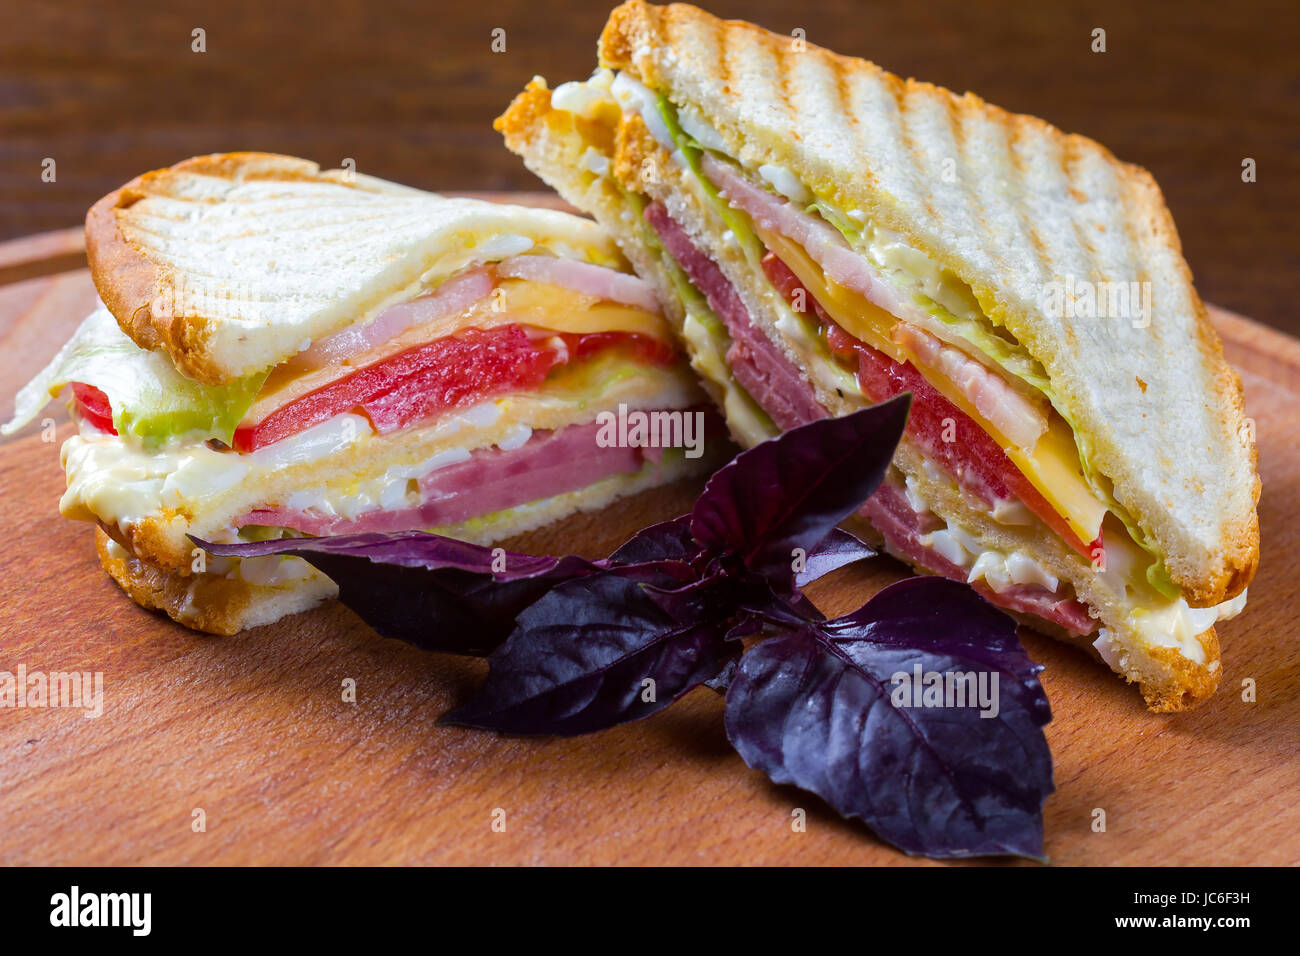 Club sandwiches made with turkey, bacon, ham, tomato, cheese, lettuce and garnished tomatoes. Stock Photo